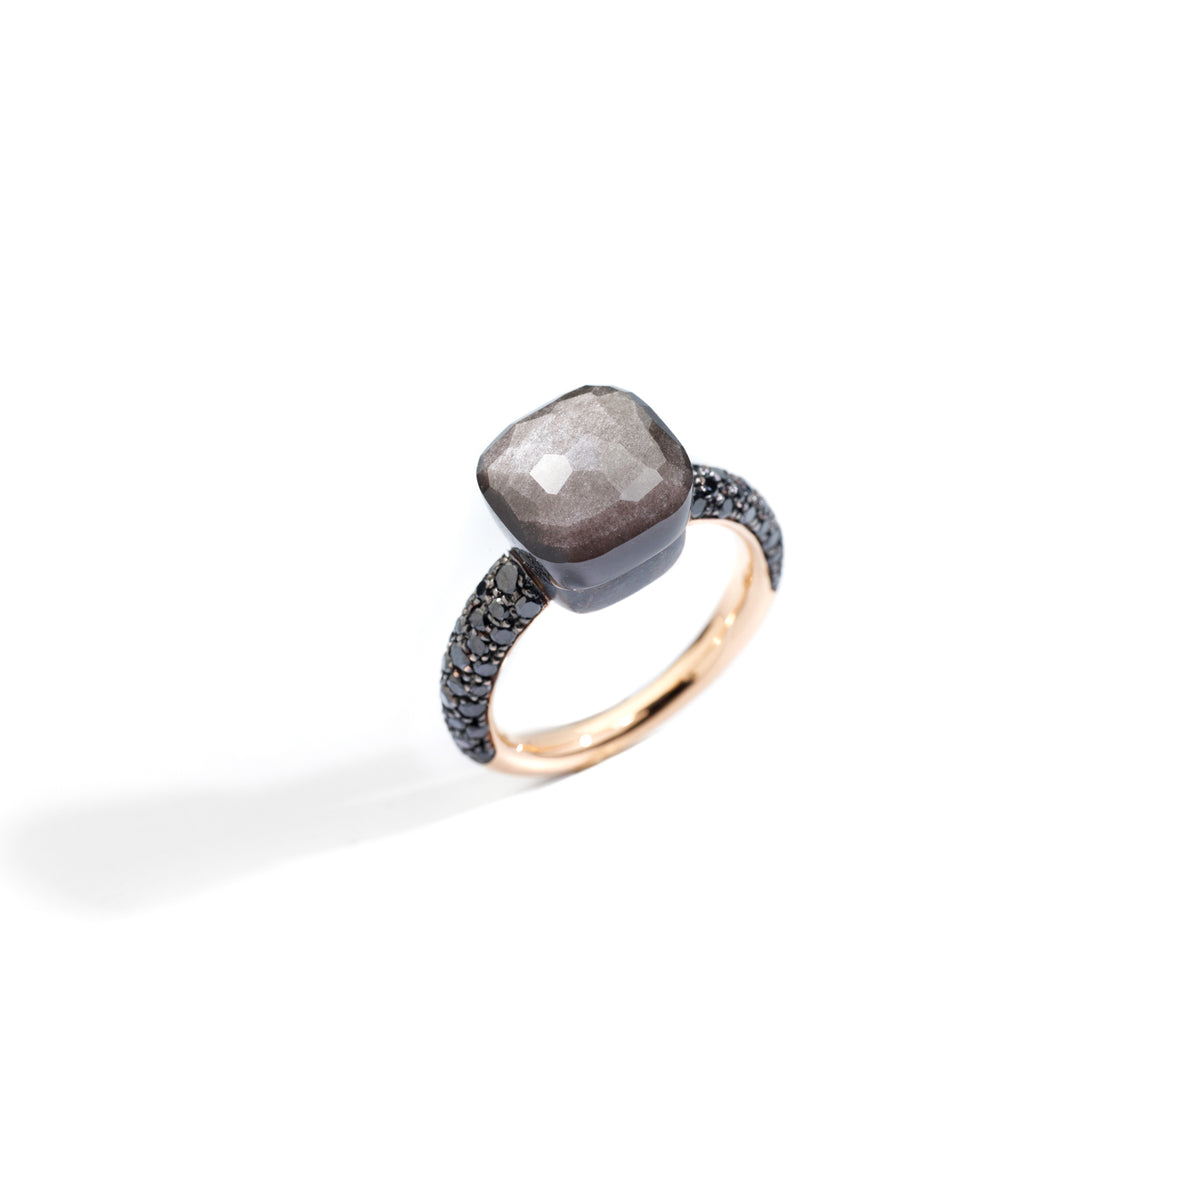 Nudo Classic Ring in 18k Rose Gold and Titanium with Obsidian and Black Diamonds - Orsini Jewellers NZ